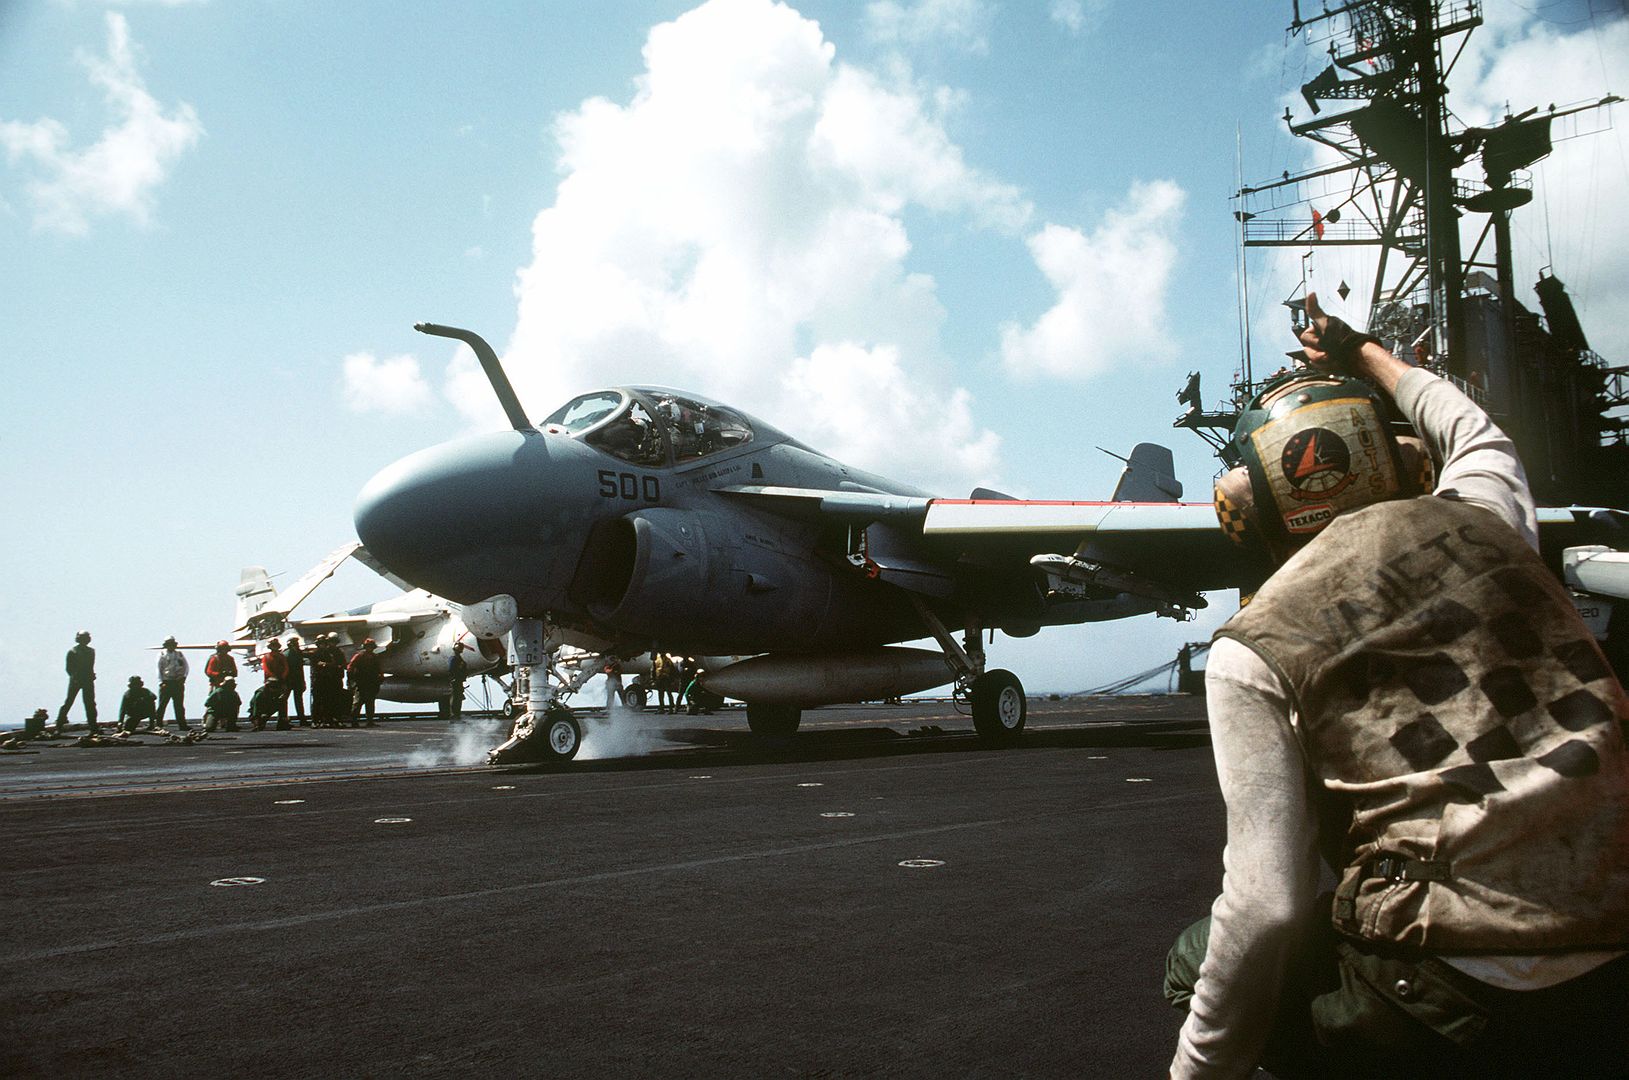 An A 6E Intruder Aircraft Is Prepared For Takeoff From The Flight Deck Of The Aircraft Carrier USS MIDWAY